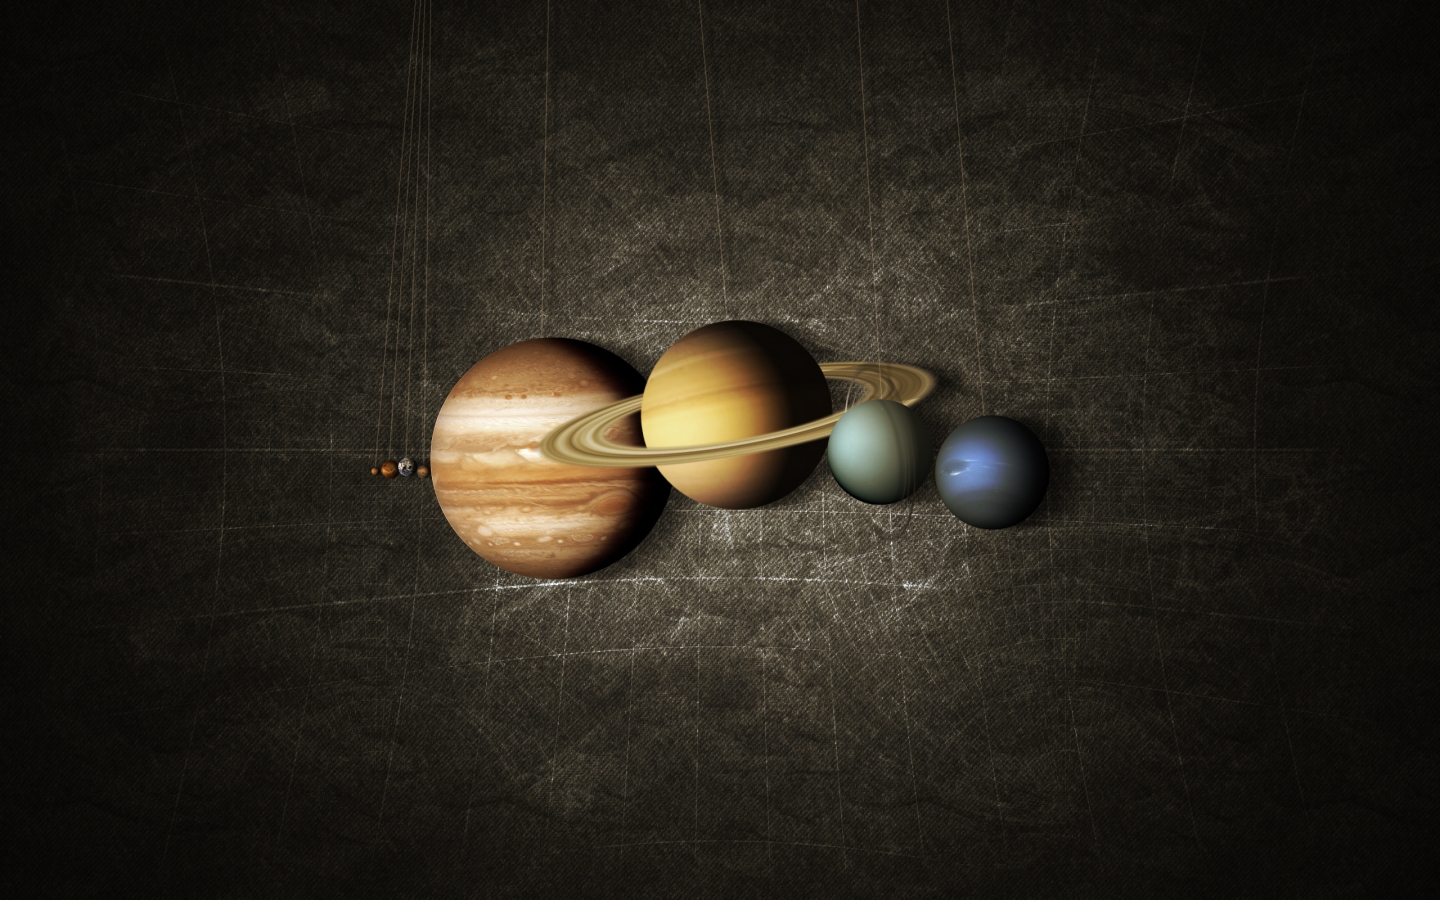 Planets Aligned for 1440 x 900 widescreen resolution